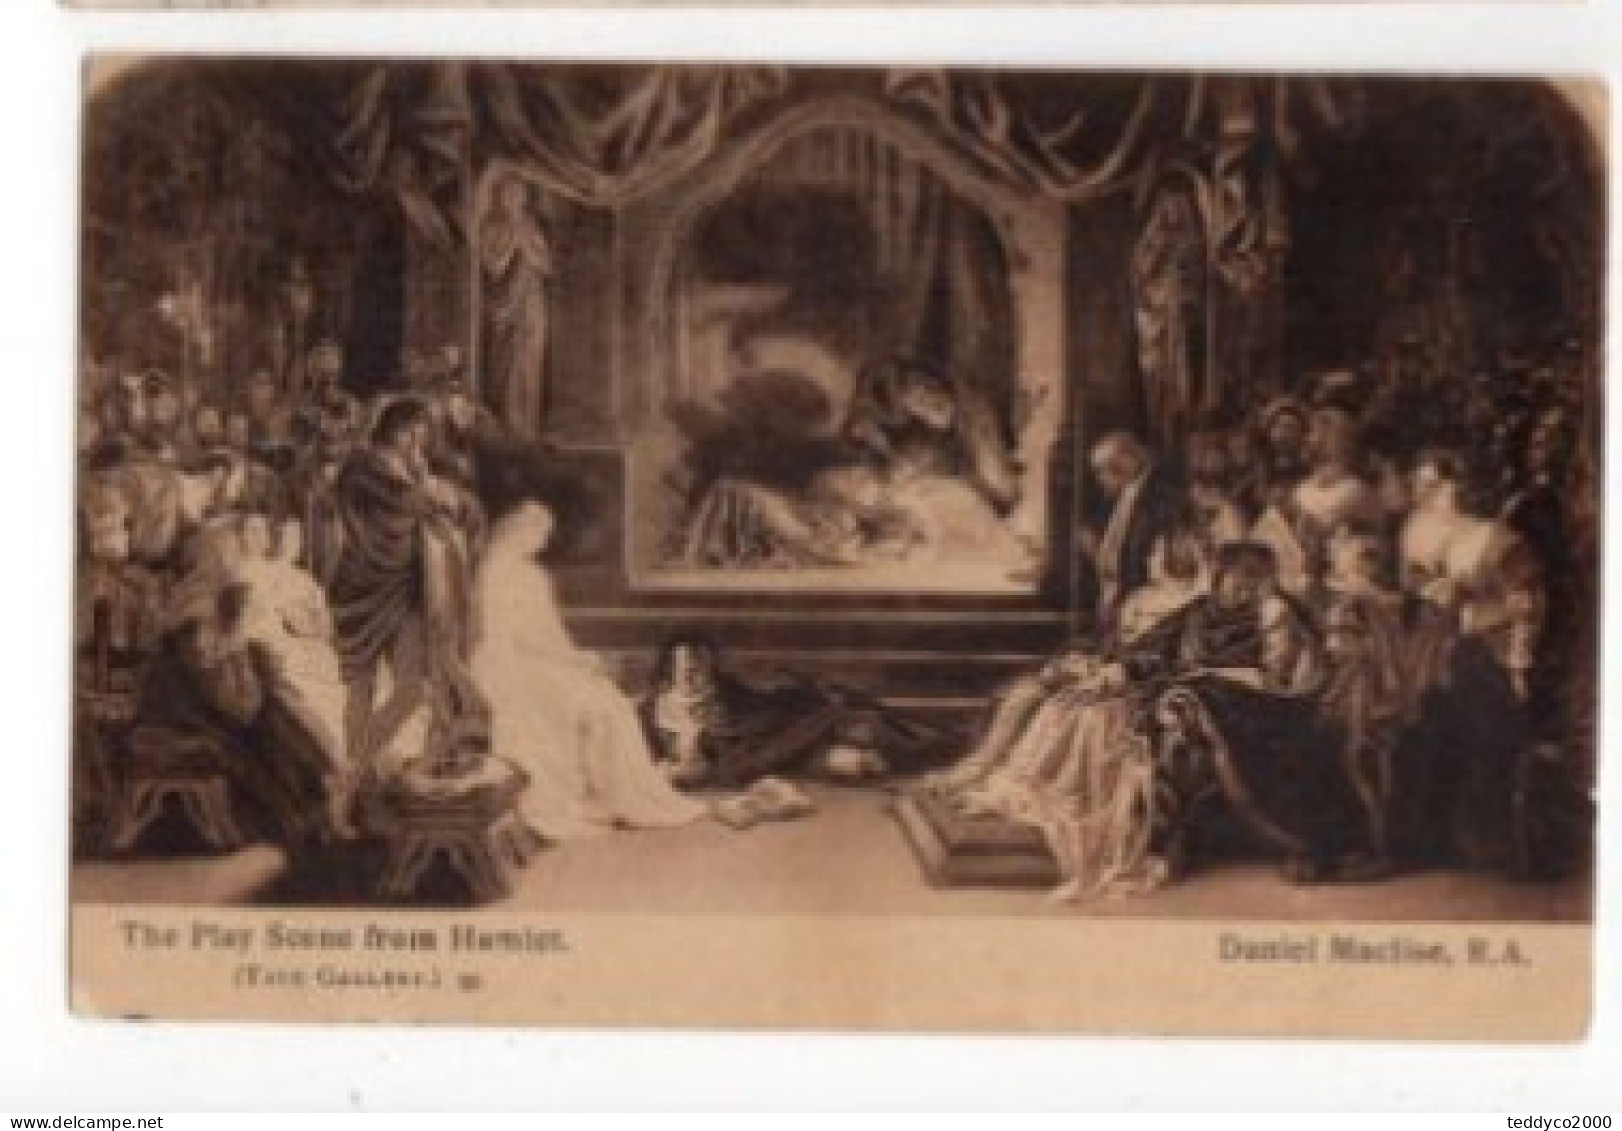 TATE GALLERY, Daniel Maclise The Play Scene From Hamlet 1911 - Museen